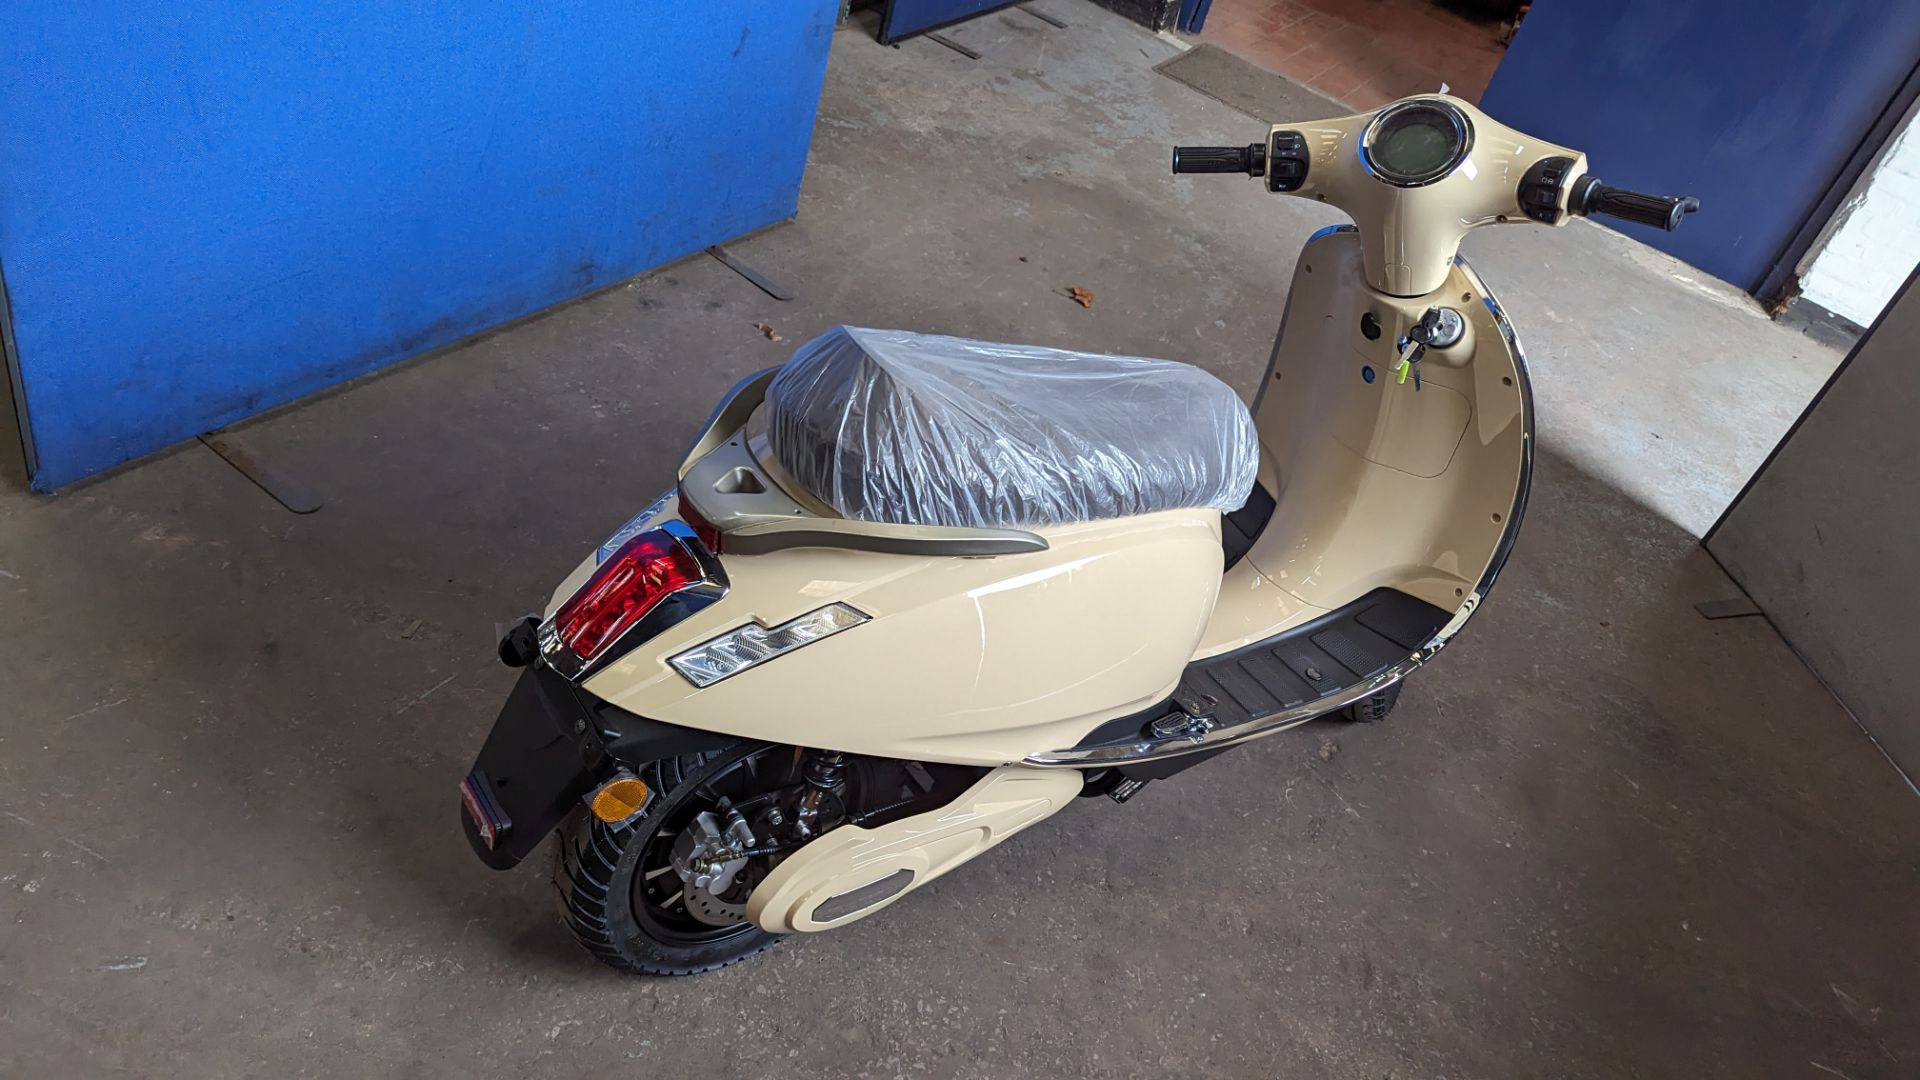 Model 30 Roma electric moped: 2000w brushless DC hub motor, CATL 48V 50Ah removable lithium battery - Image 22 of 22